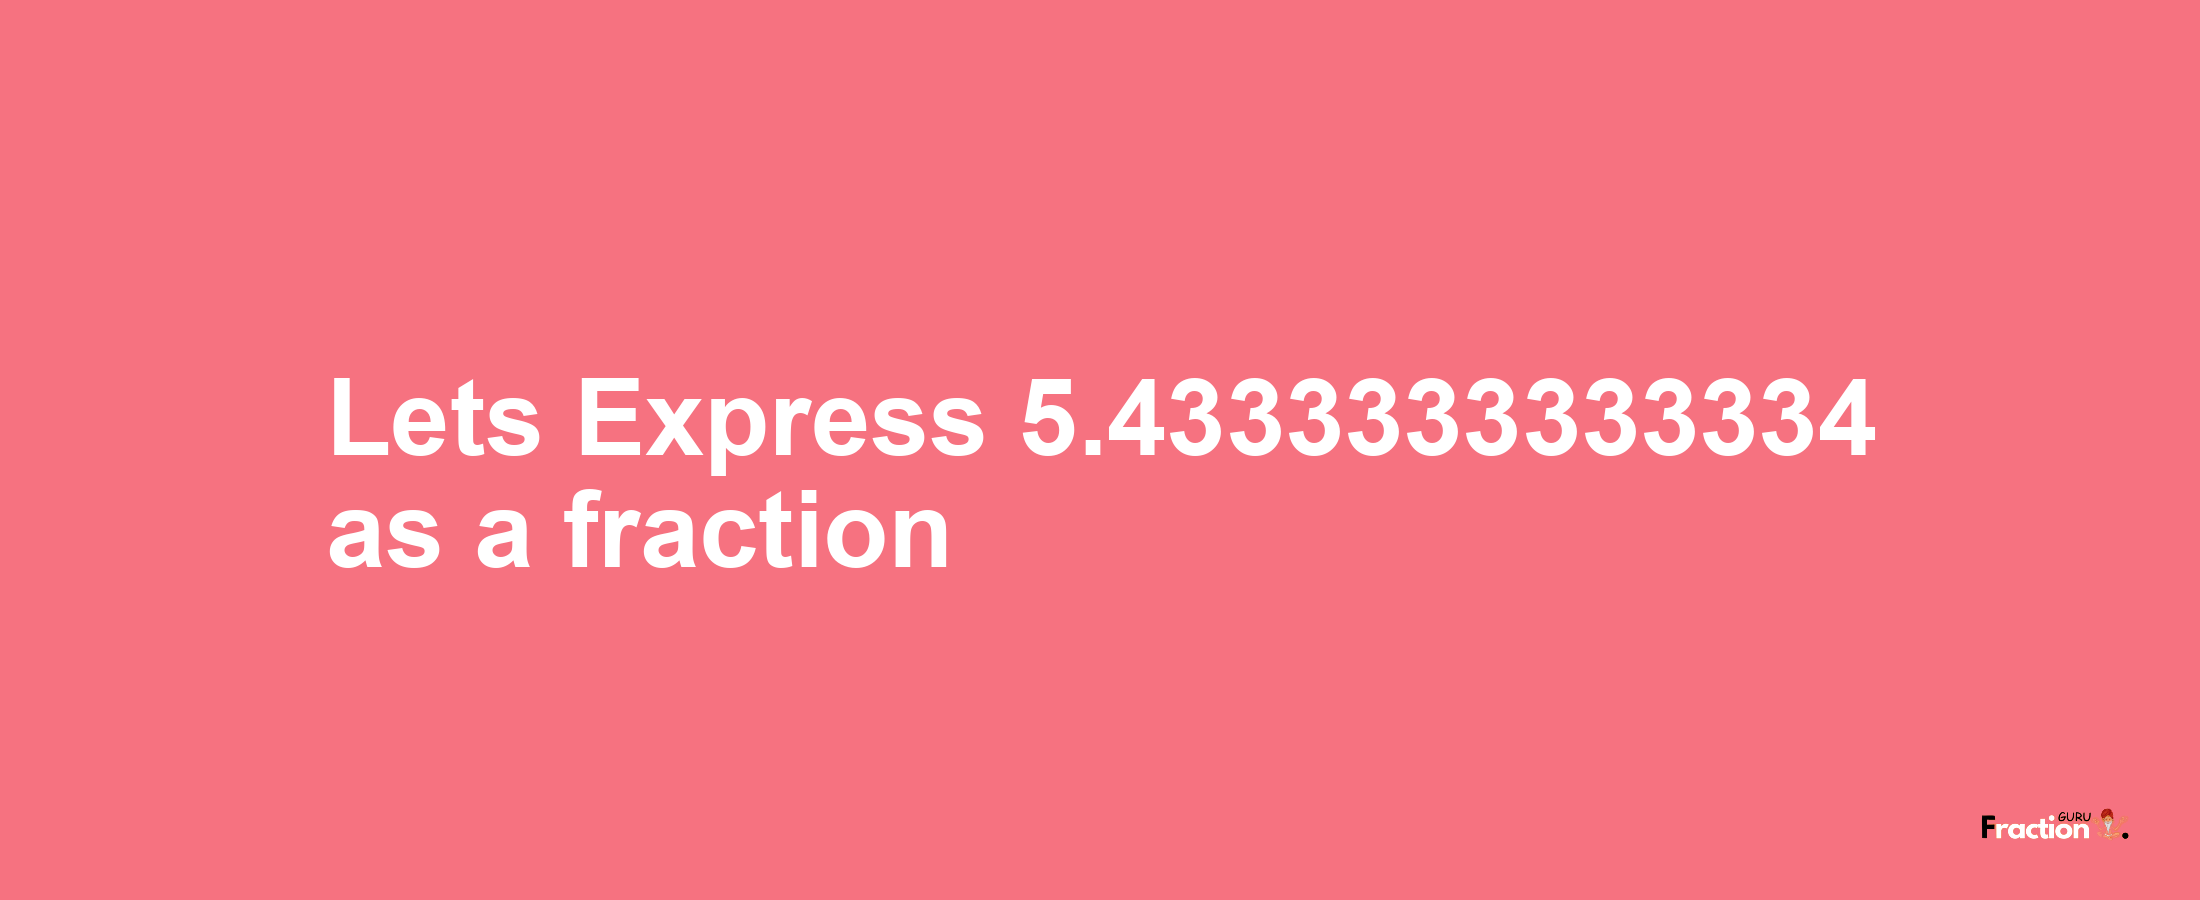 Lets Express 5.4333333333334 as afraction